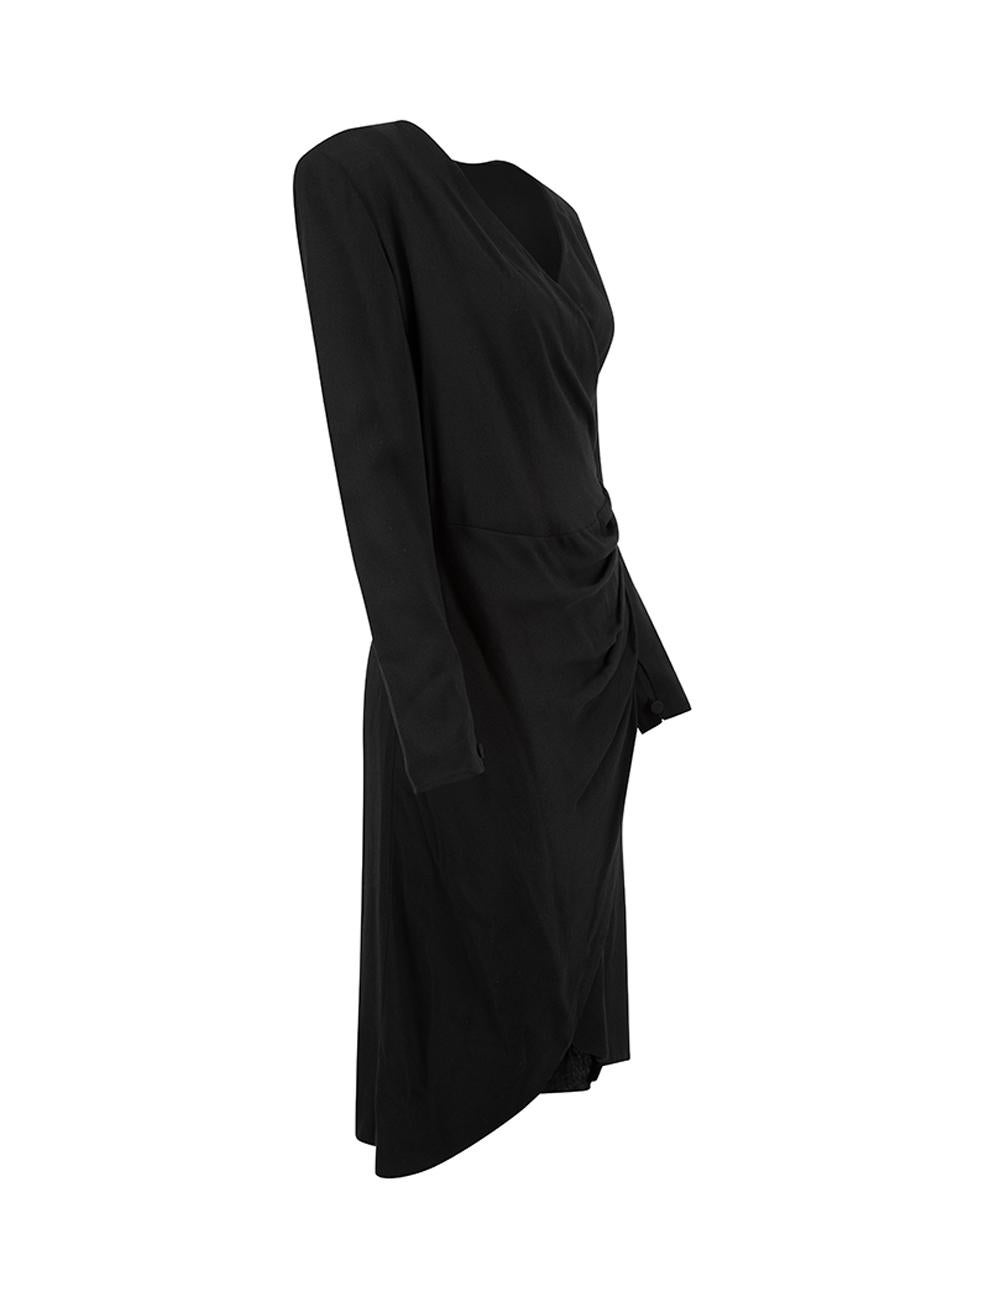 CONDITION is Very good. Minimal wear to dress is evident. Hemline is coming unstitched on this used Emporio Armani designer resale item.   Details  Black Viscose Knee length dress V neckline Shoulder padded Buttoned cuff Front button accent wrap